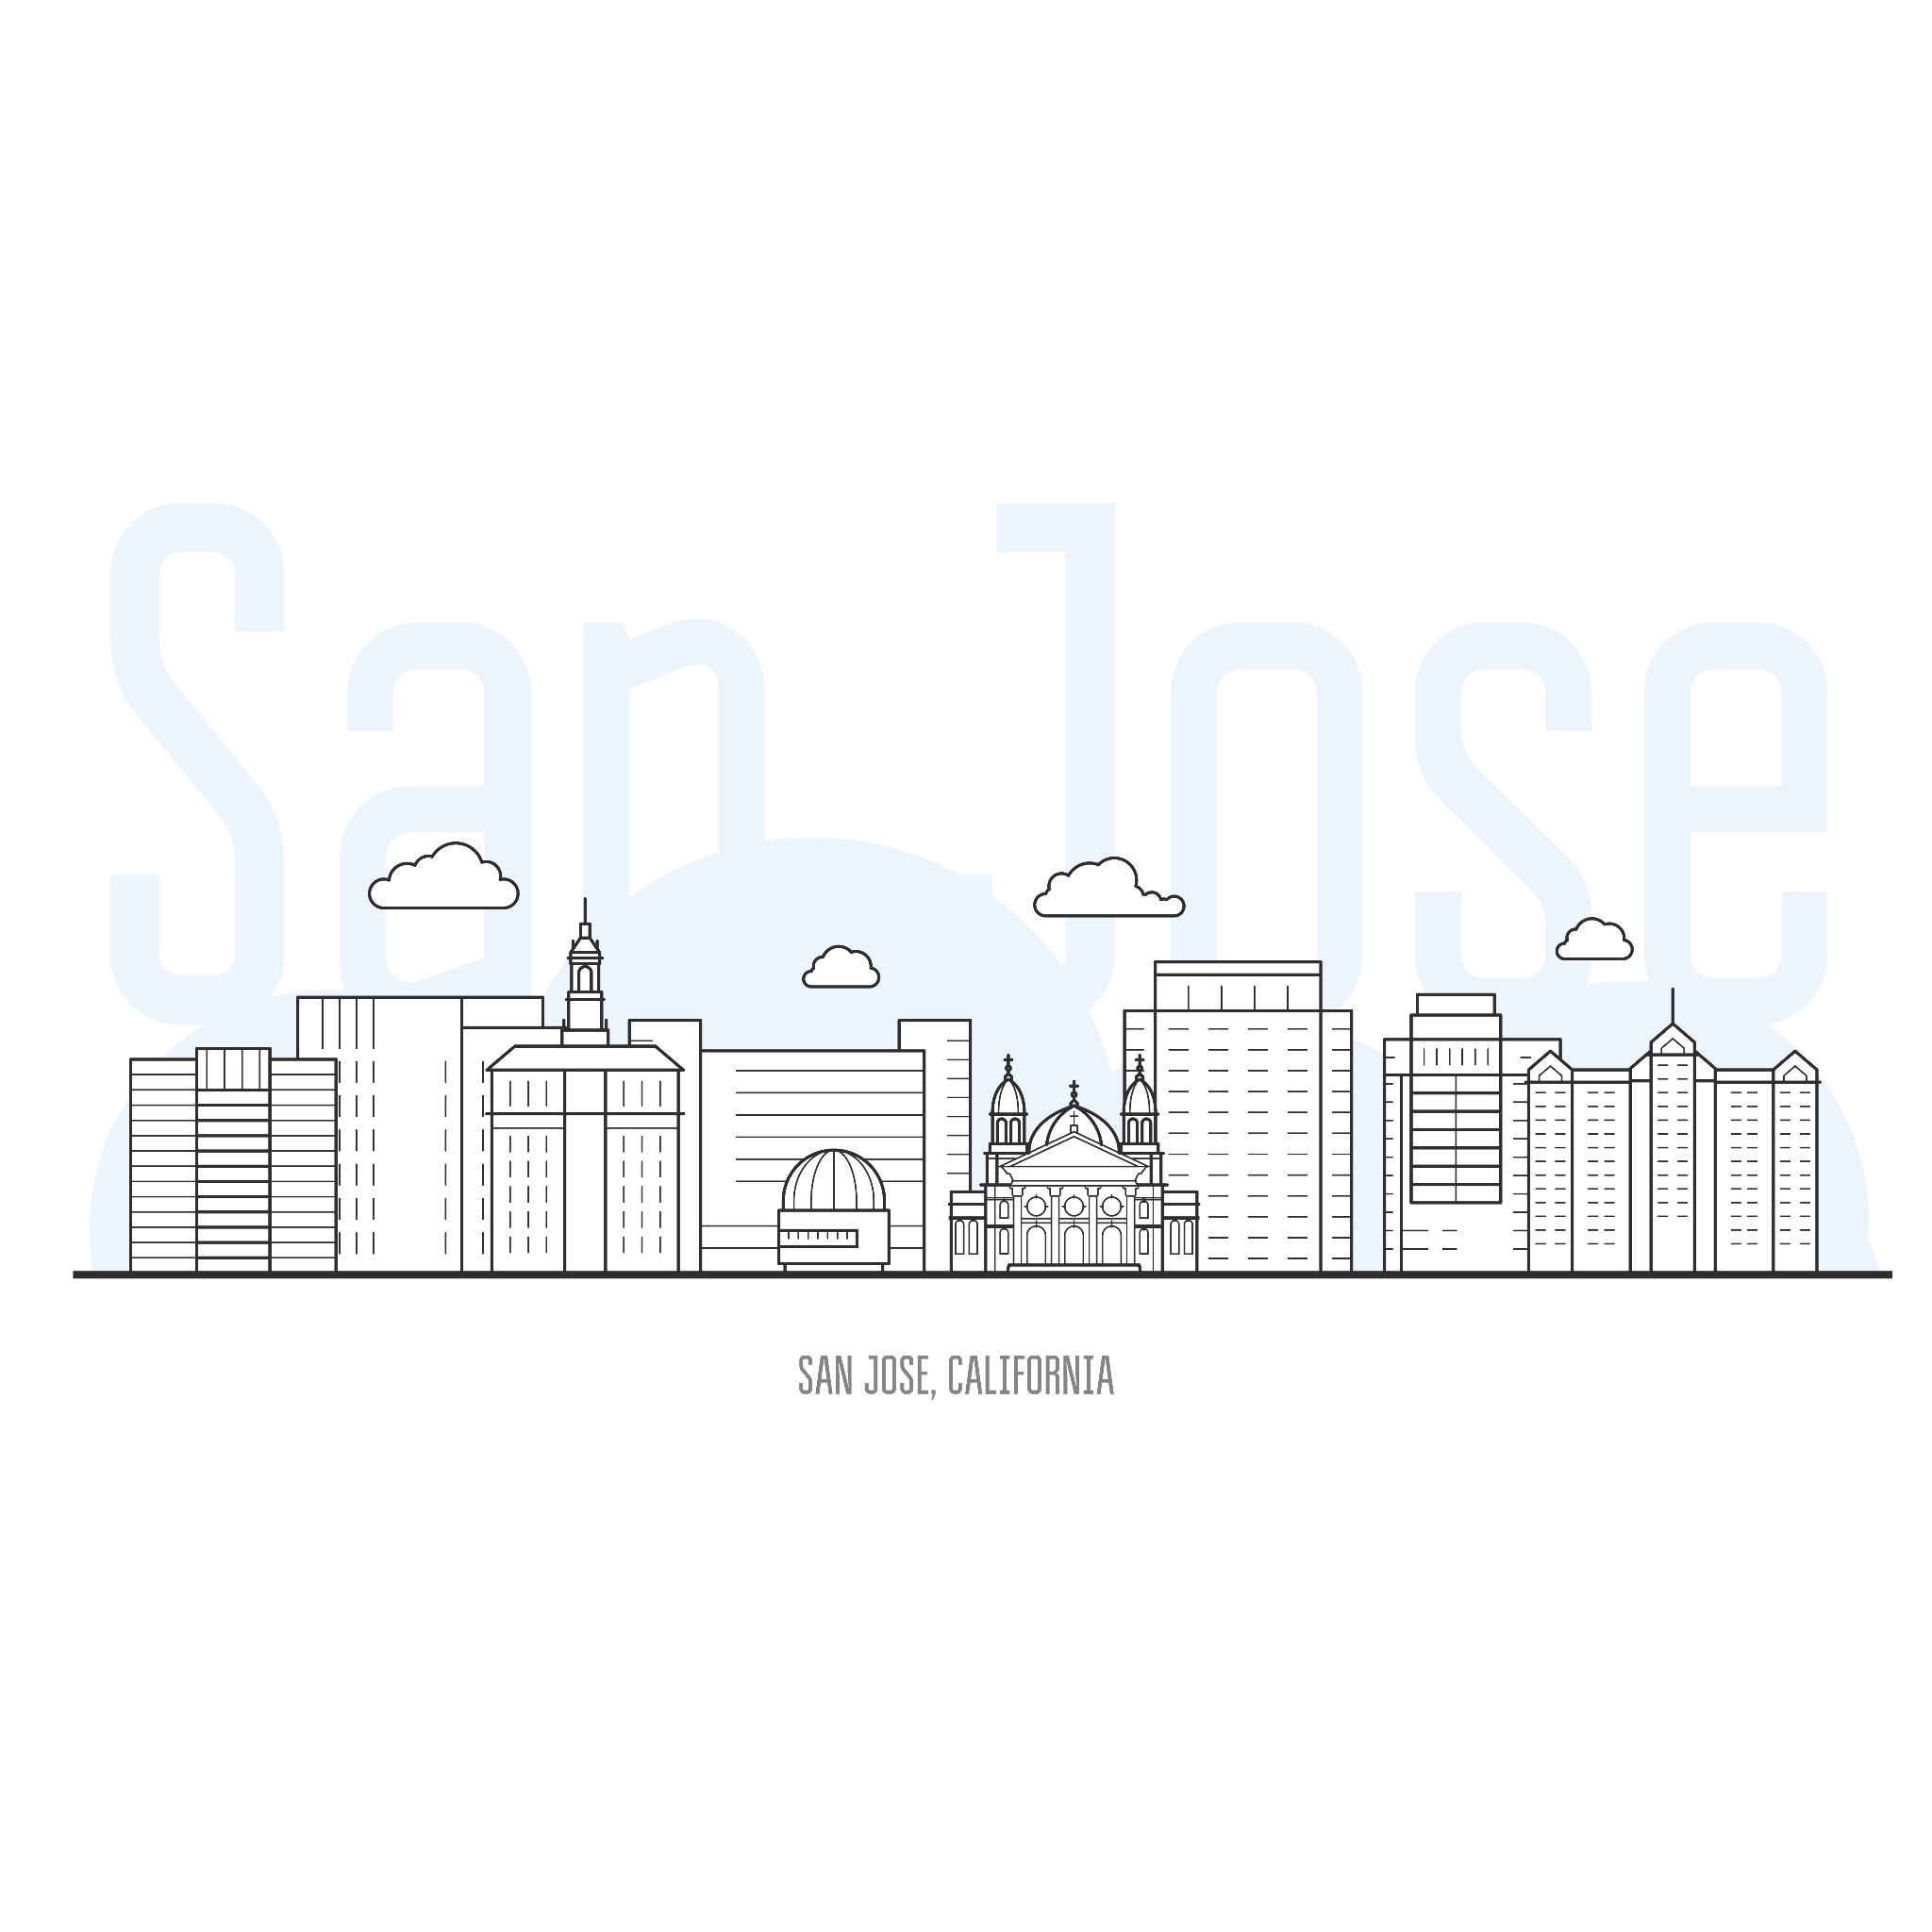 Silhouette of the San Jose, California skyline against a sunset backdrop.